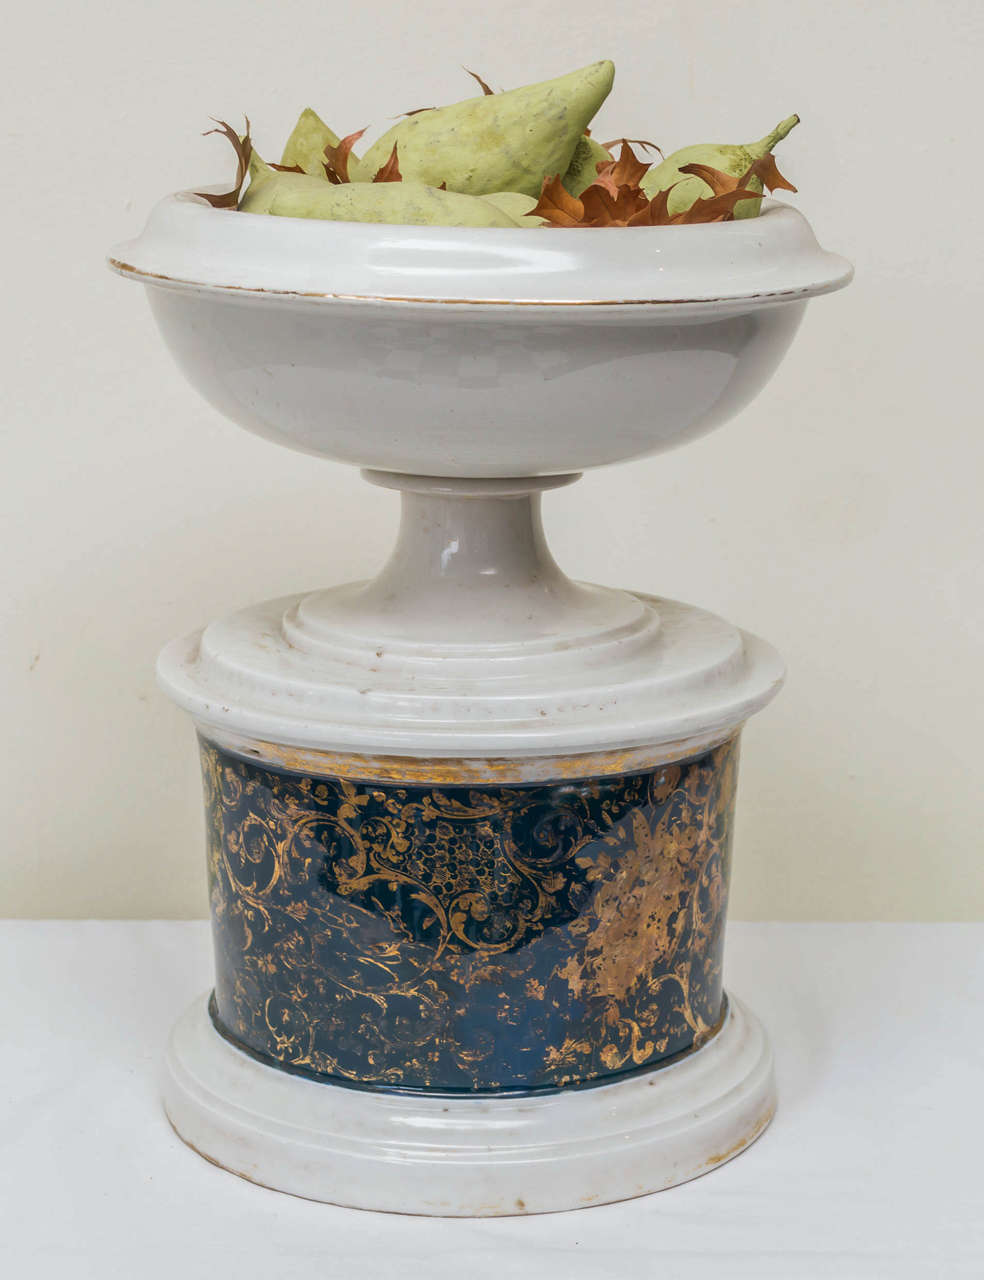 19th century French Paris porcelain compote of bold form. Blue and gilt Rococo decoration. Good large scale centerpiece, circa 1860.